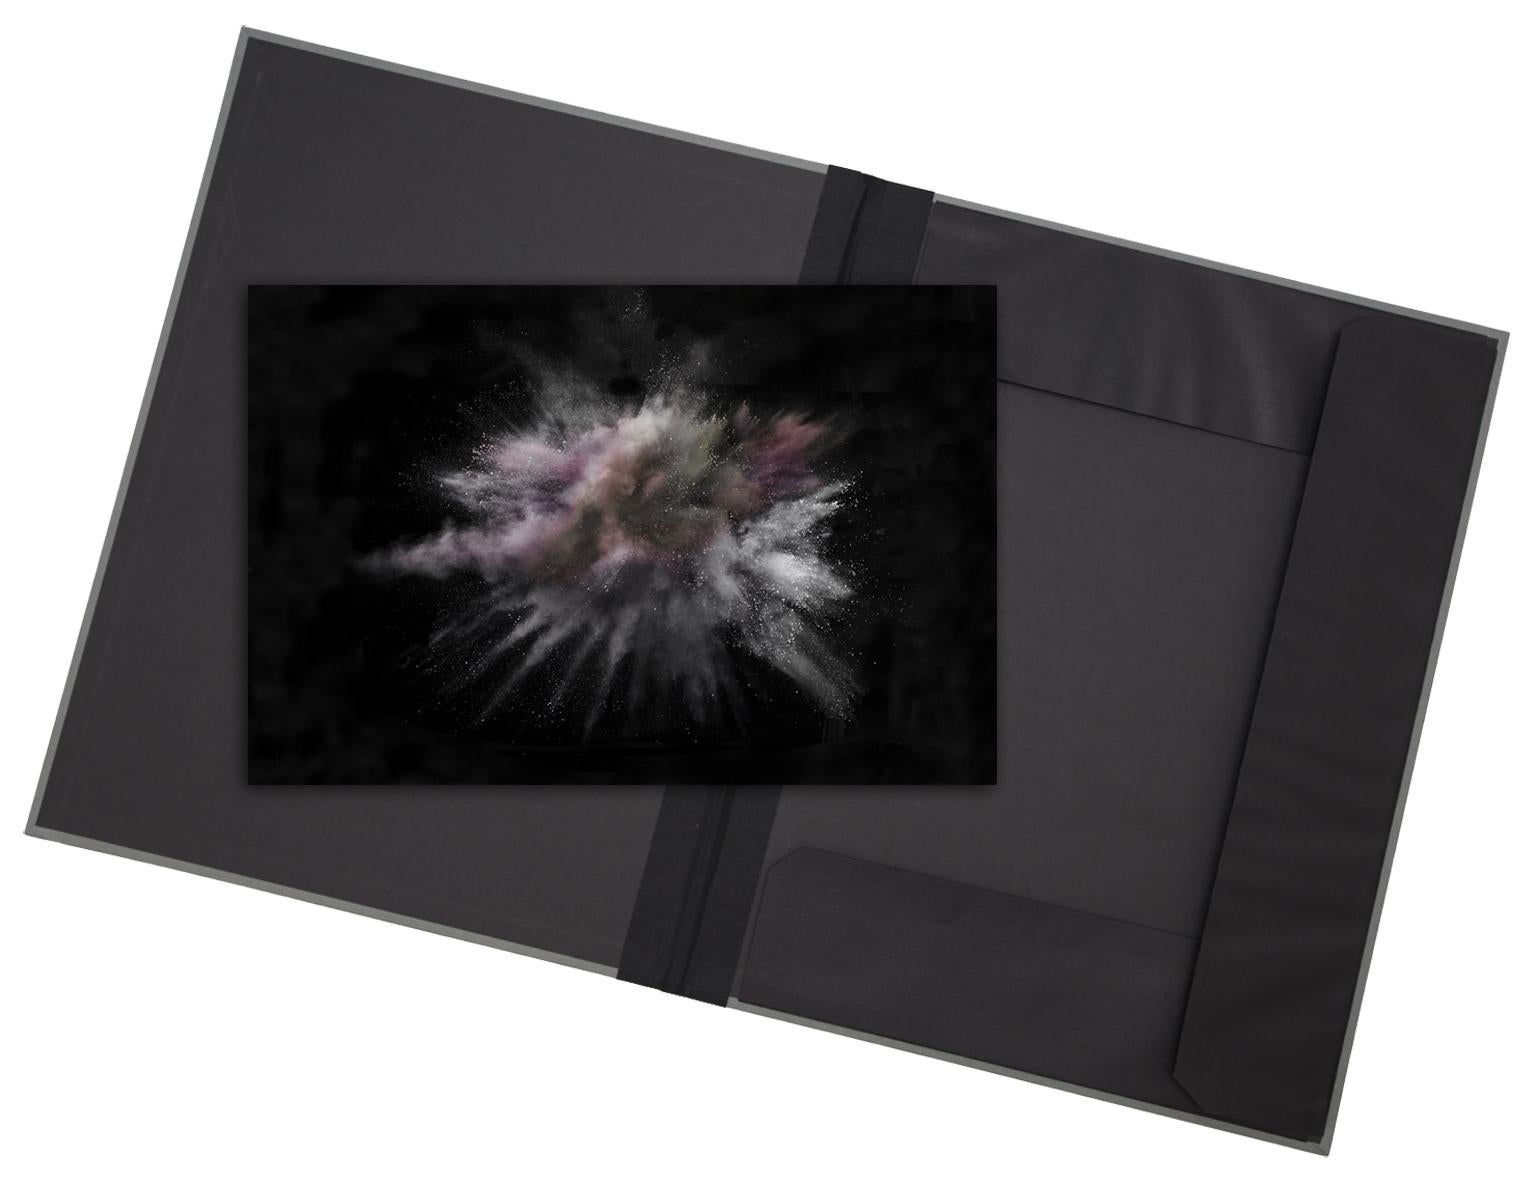 Christian Stoll Abstract Print - Burst II - limited edition photograph in archival artwork portfolio gift binder